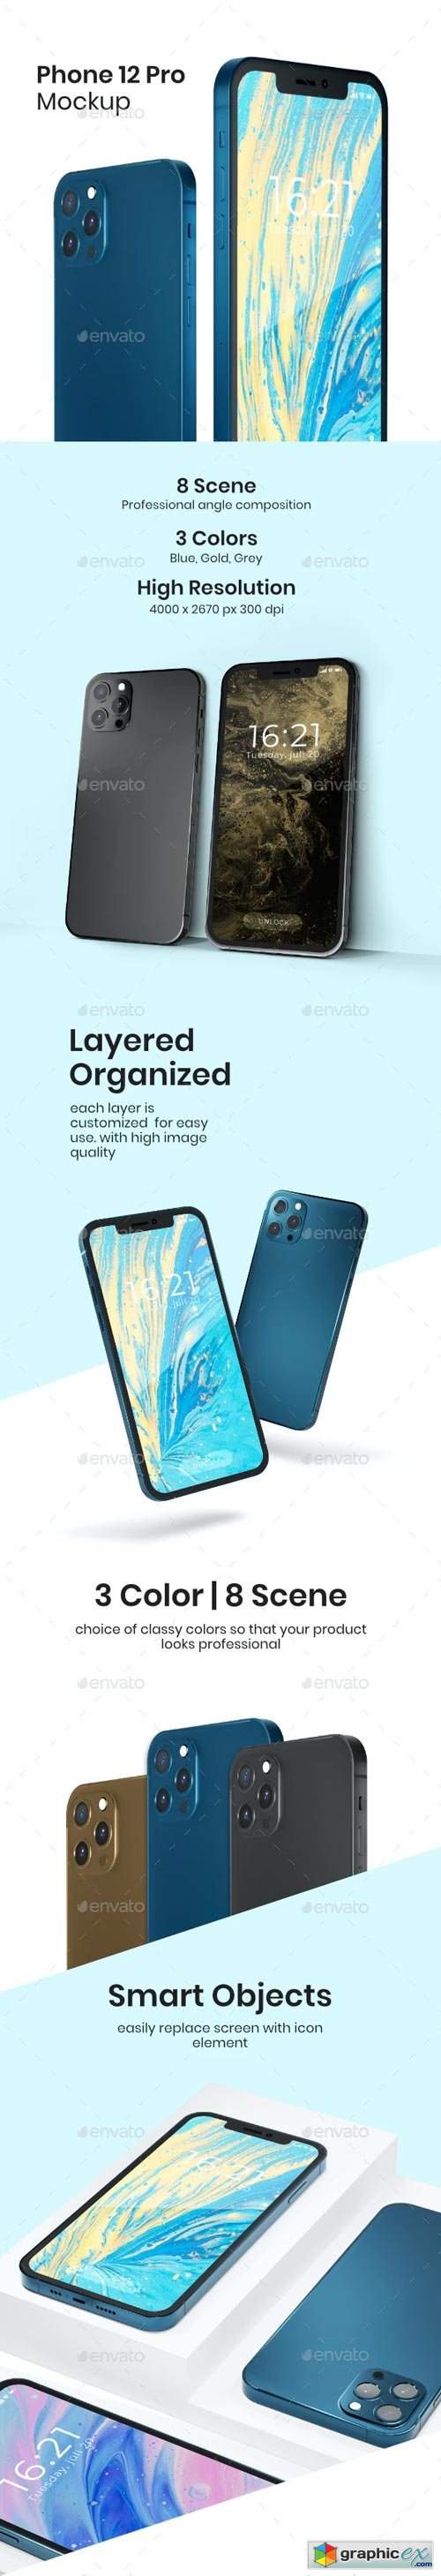 Smartphone 12 Pro Mock-ups PSD in 3 Colors » Free Download Vector Stock ...